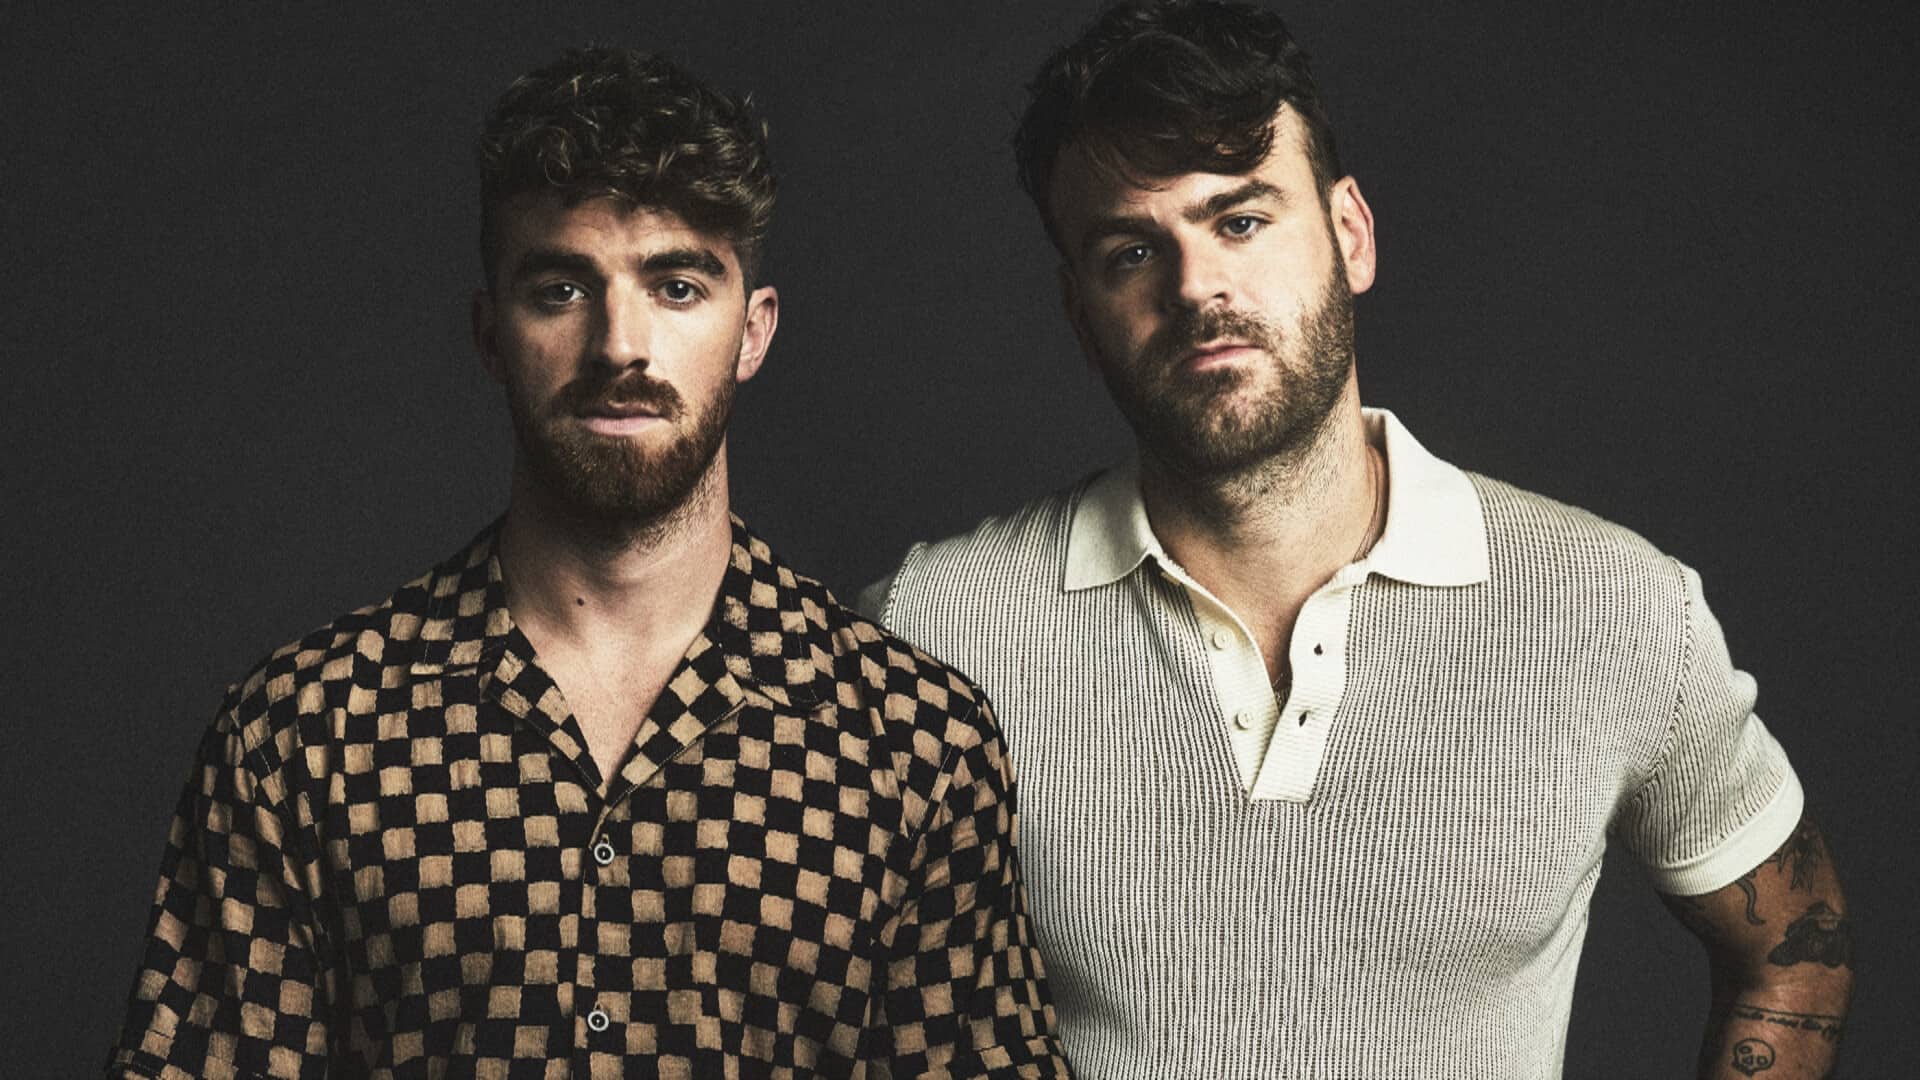 Creamfields announce The Chainsmokers as latest 2020 headliner